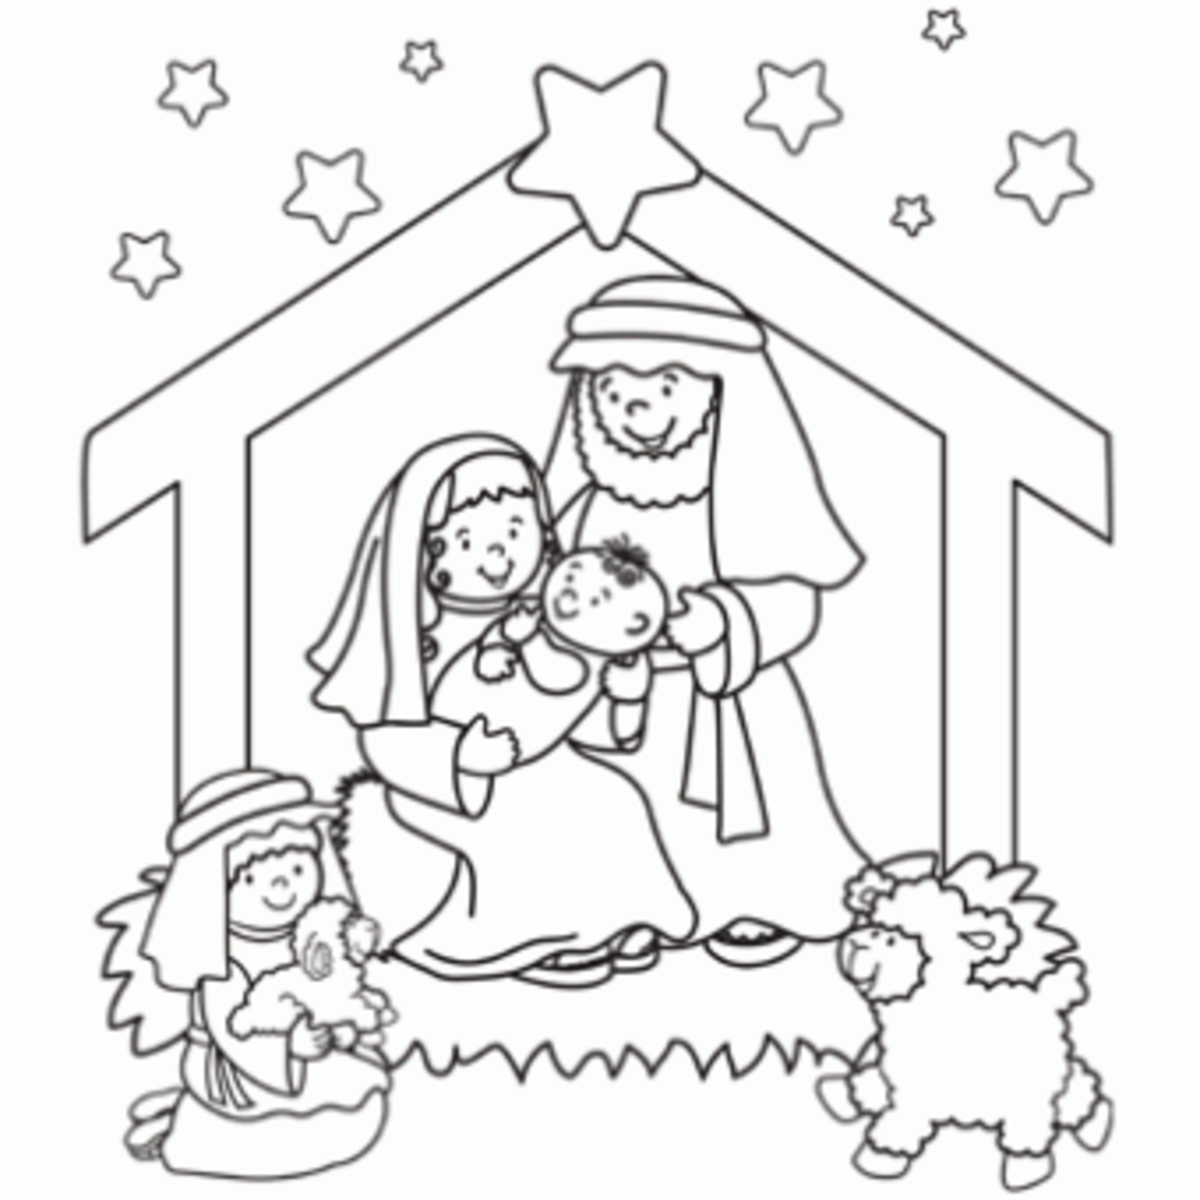 Download Online Christmas Nativity Printables | hubpages